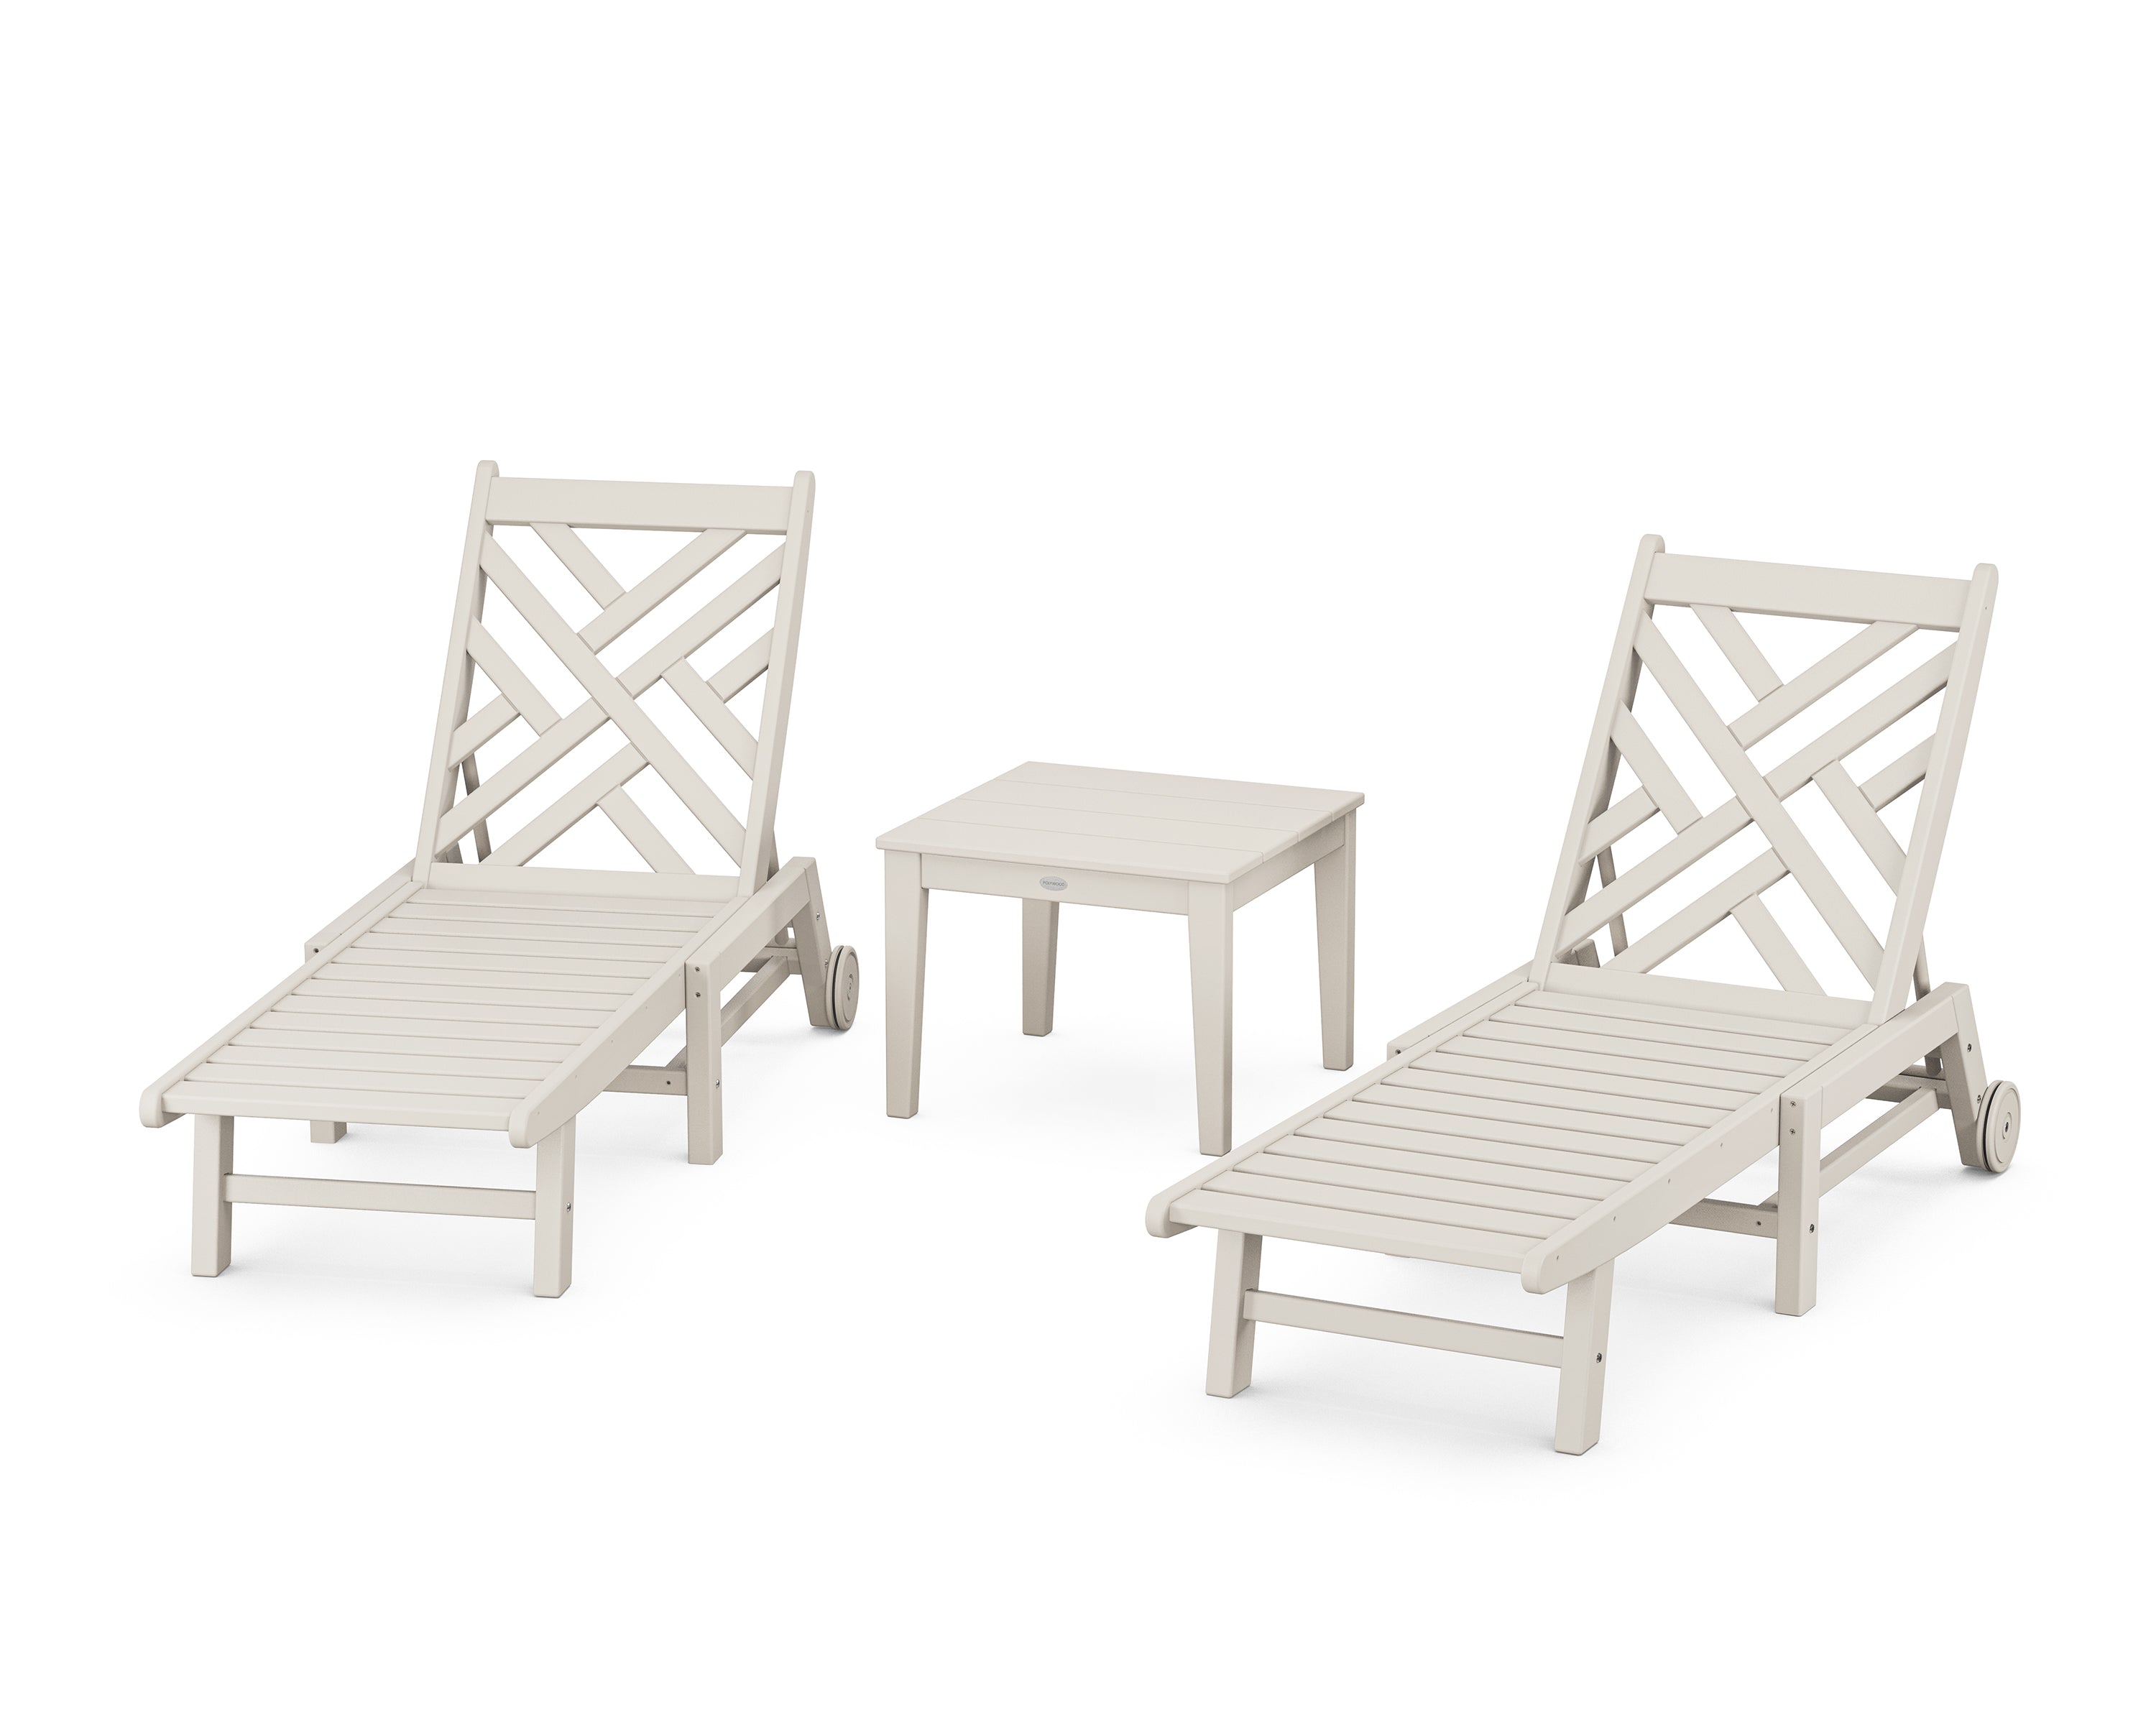 POLYWOOD Chippendale 3-Piece Chaise Set with Wheels in Sand